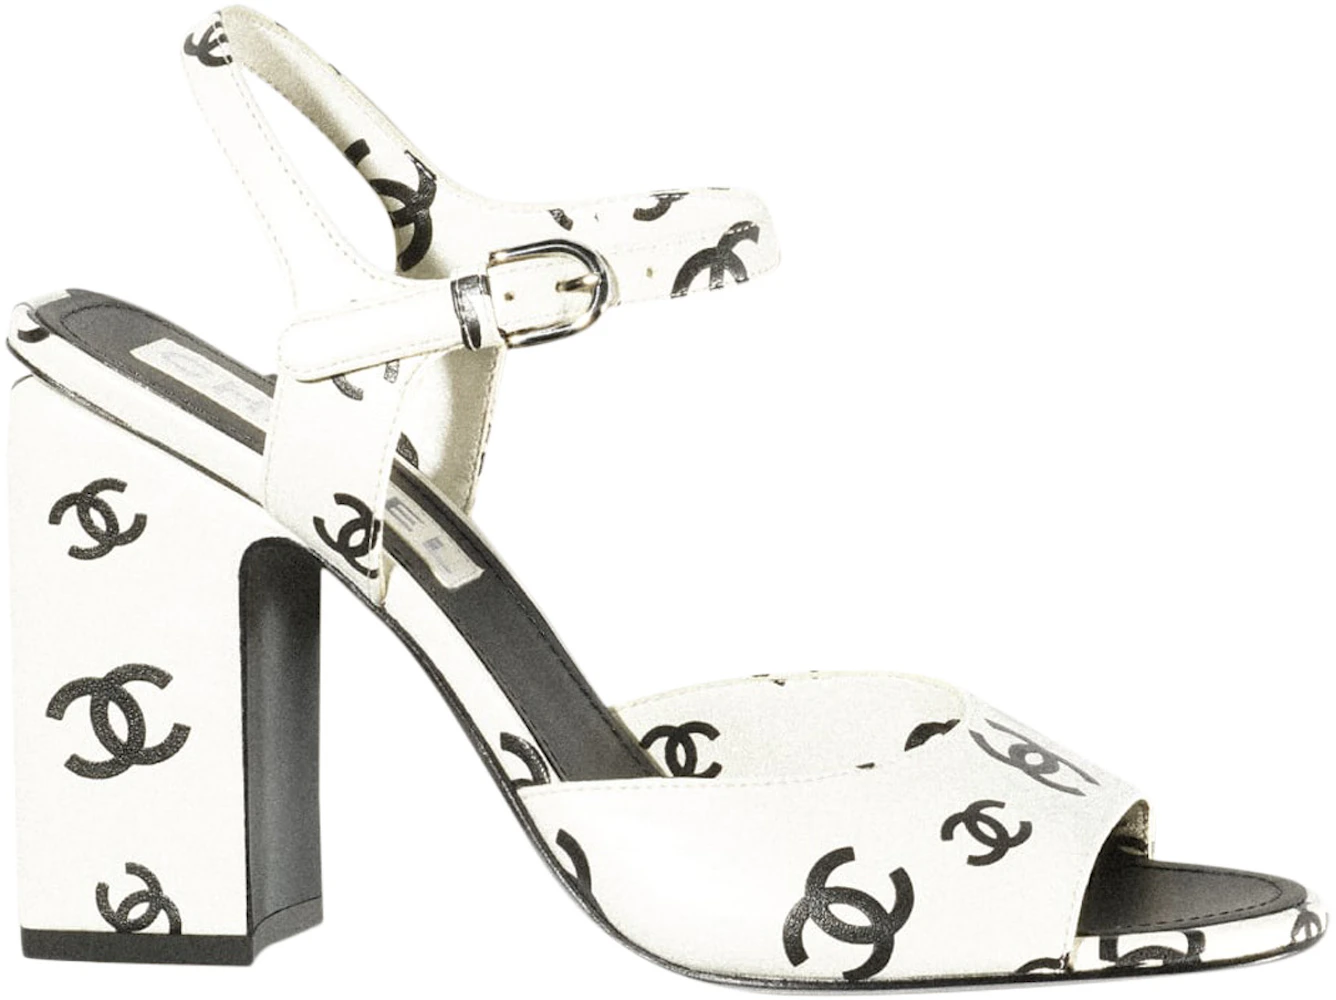 Chanel White Leather Bow CC logo Heels Sandals